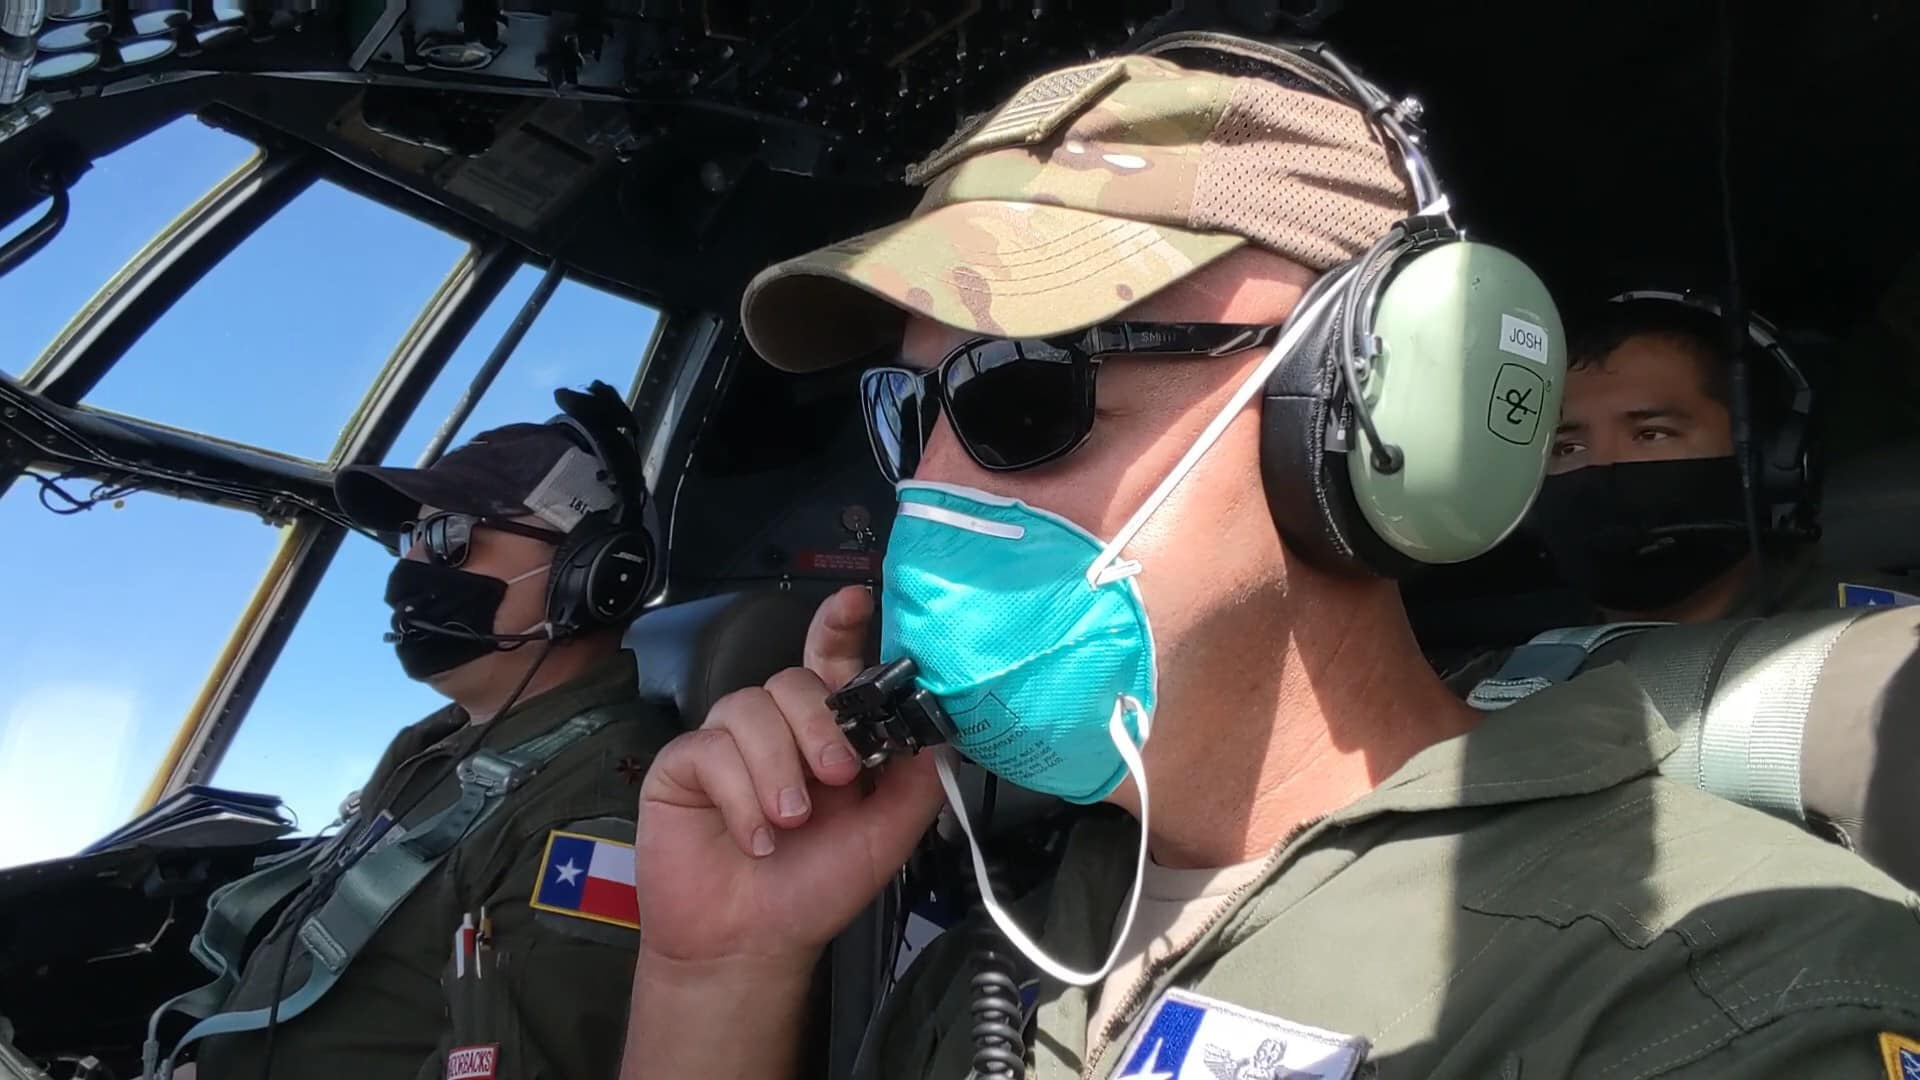 Texas National Guard C-130 Hercules aircrews were busy delivering supplies and Airmen to Beaumont in anticipation of Hurricane Laura, expected to make landfall Aug. 26-27, 2020.